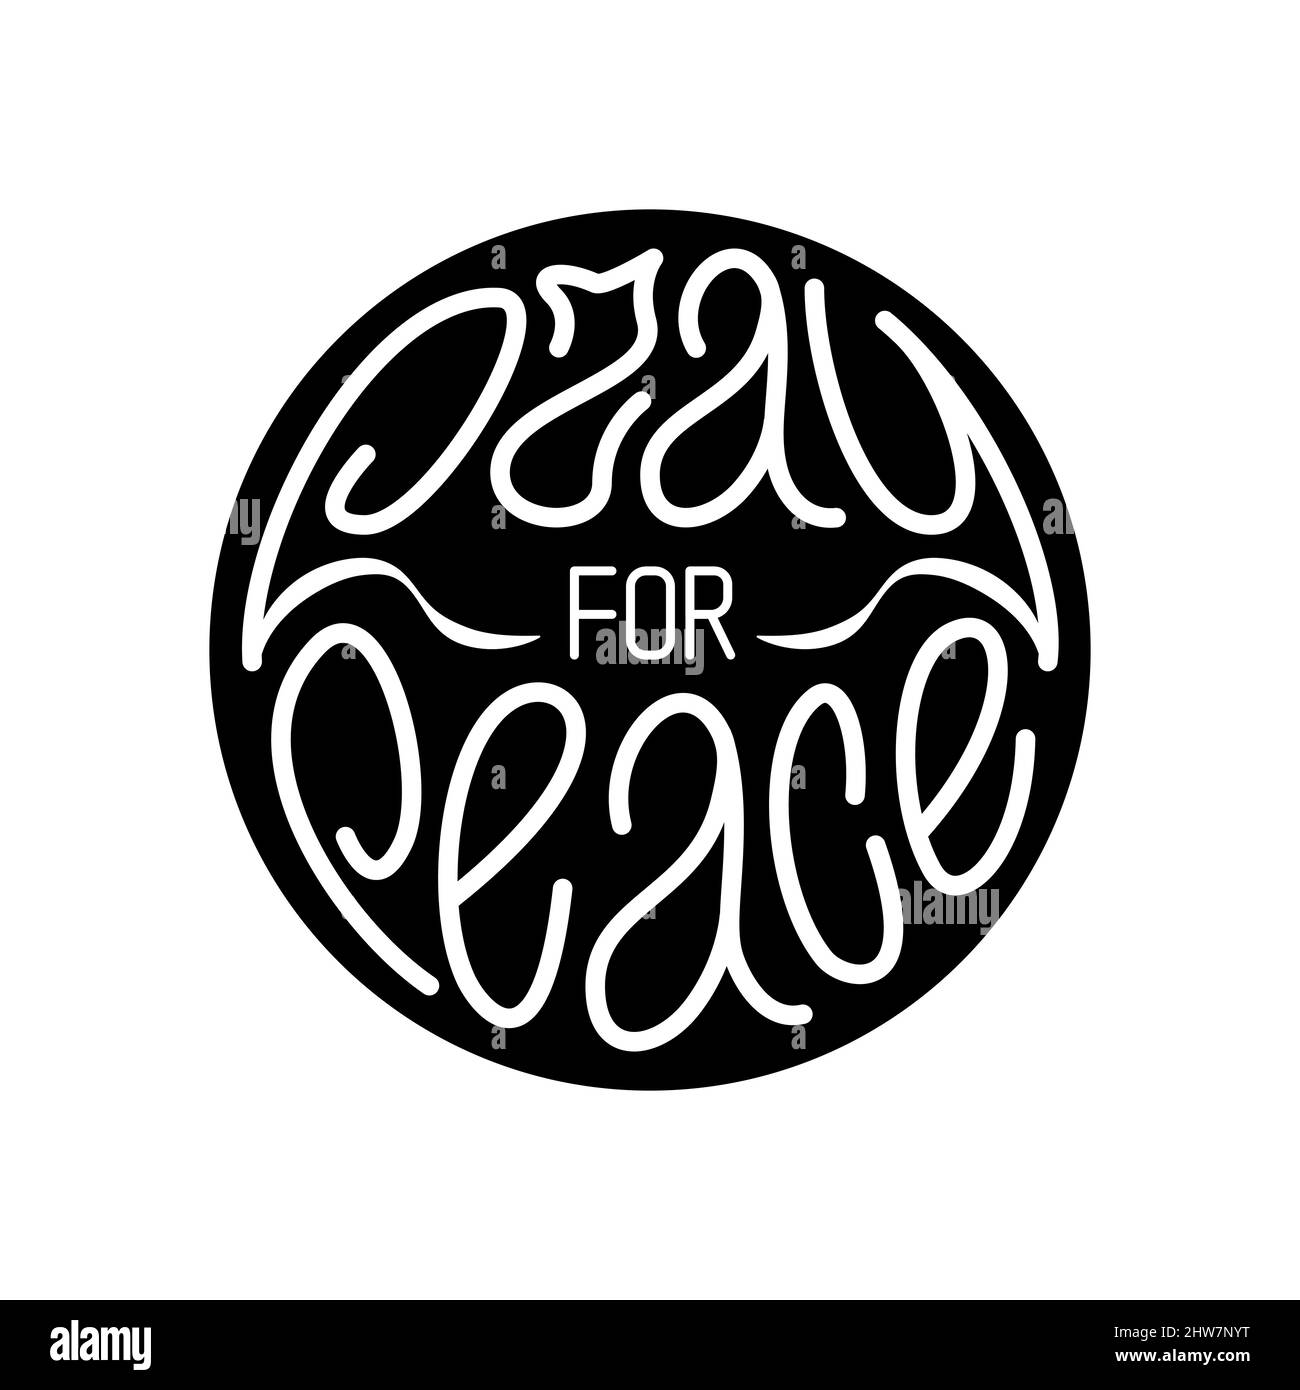 Pray for peace. Hand drawn white lettering fit in black circle, antiwar rally, peaceful movement. Vector illustration Stock Vector